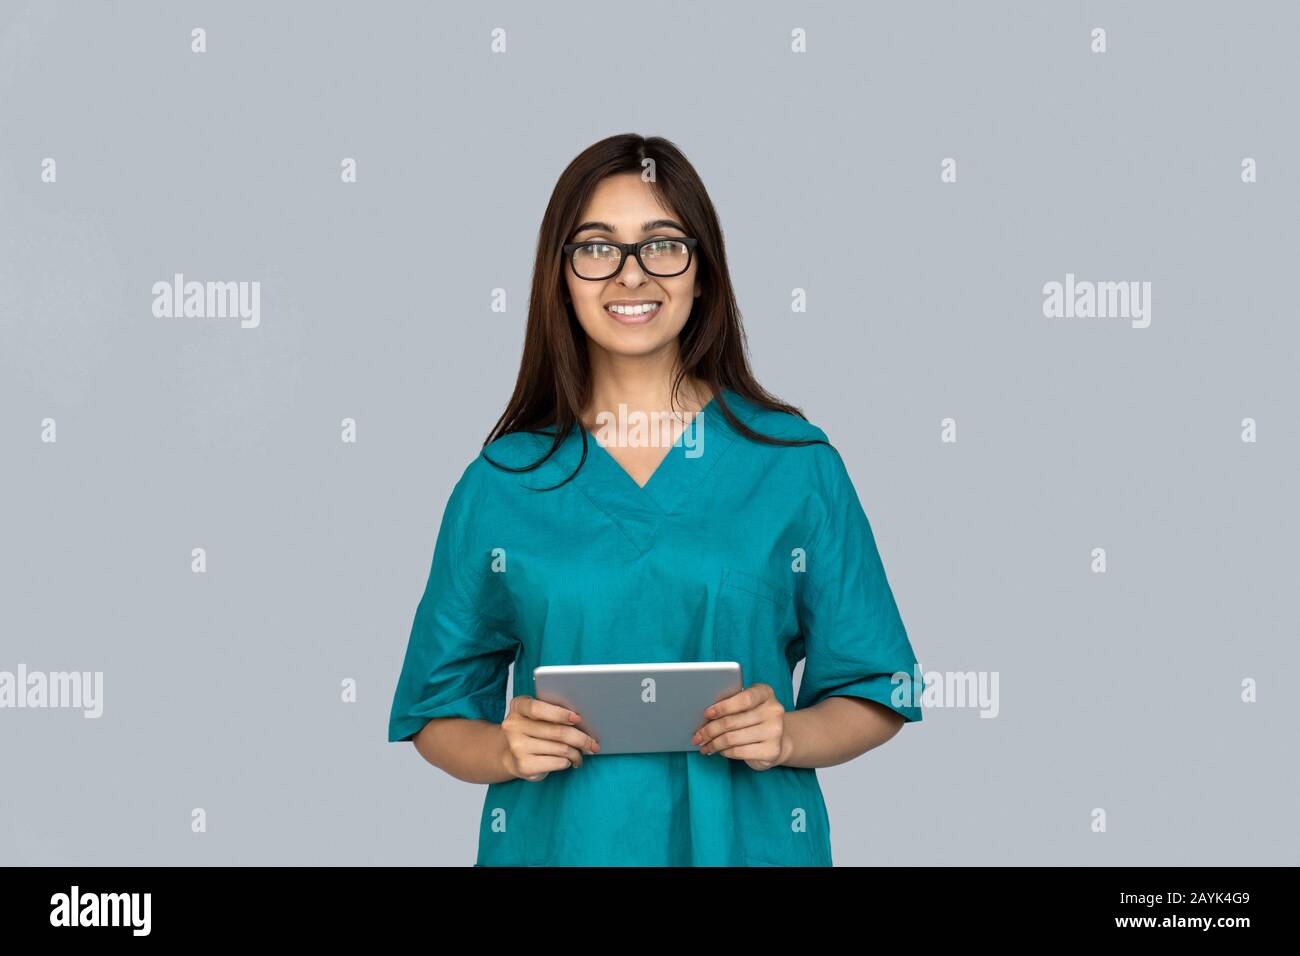 Happy young adult indian woman in doctor uniform holding tablet computer Stock Photo